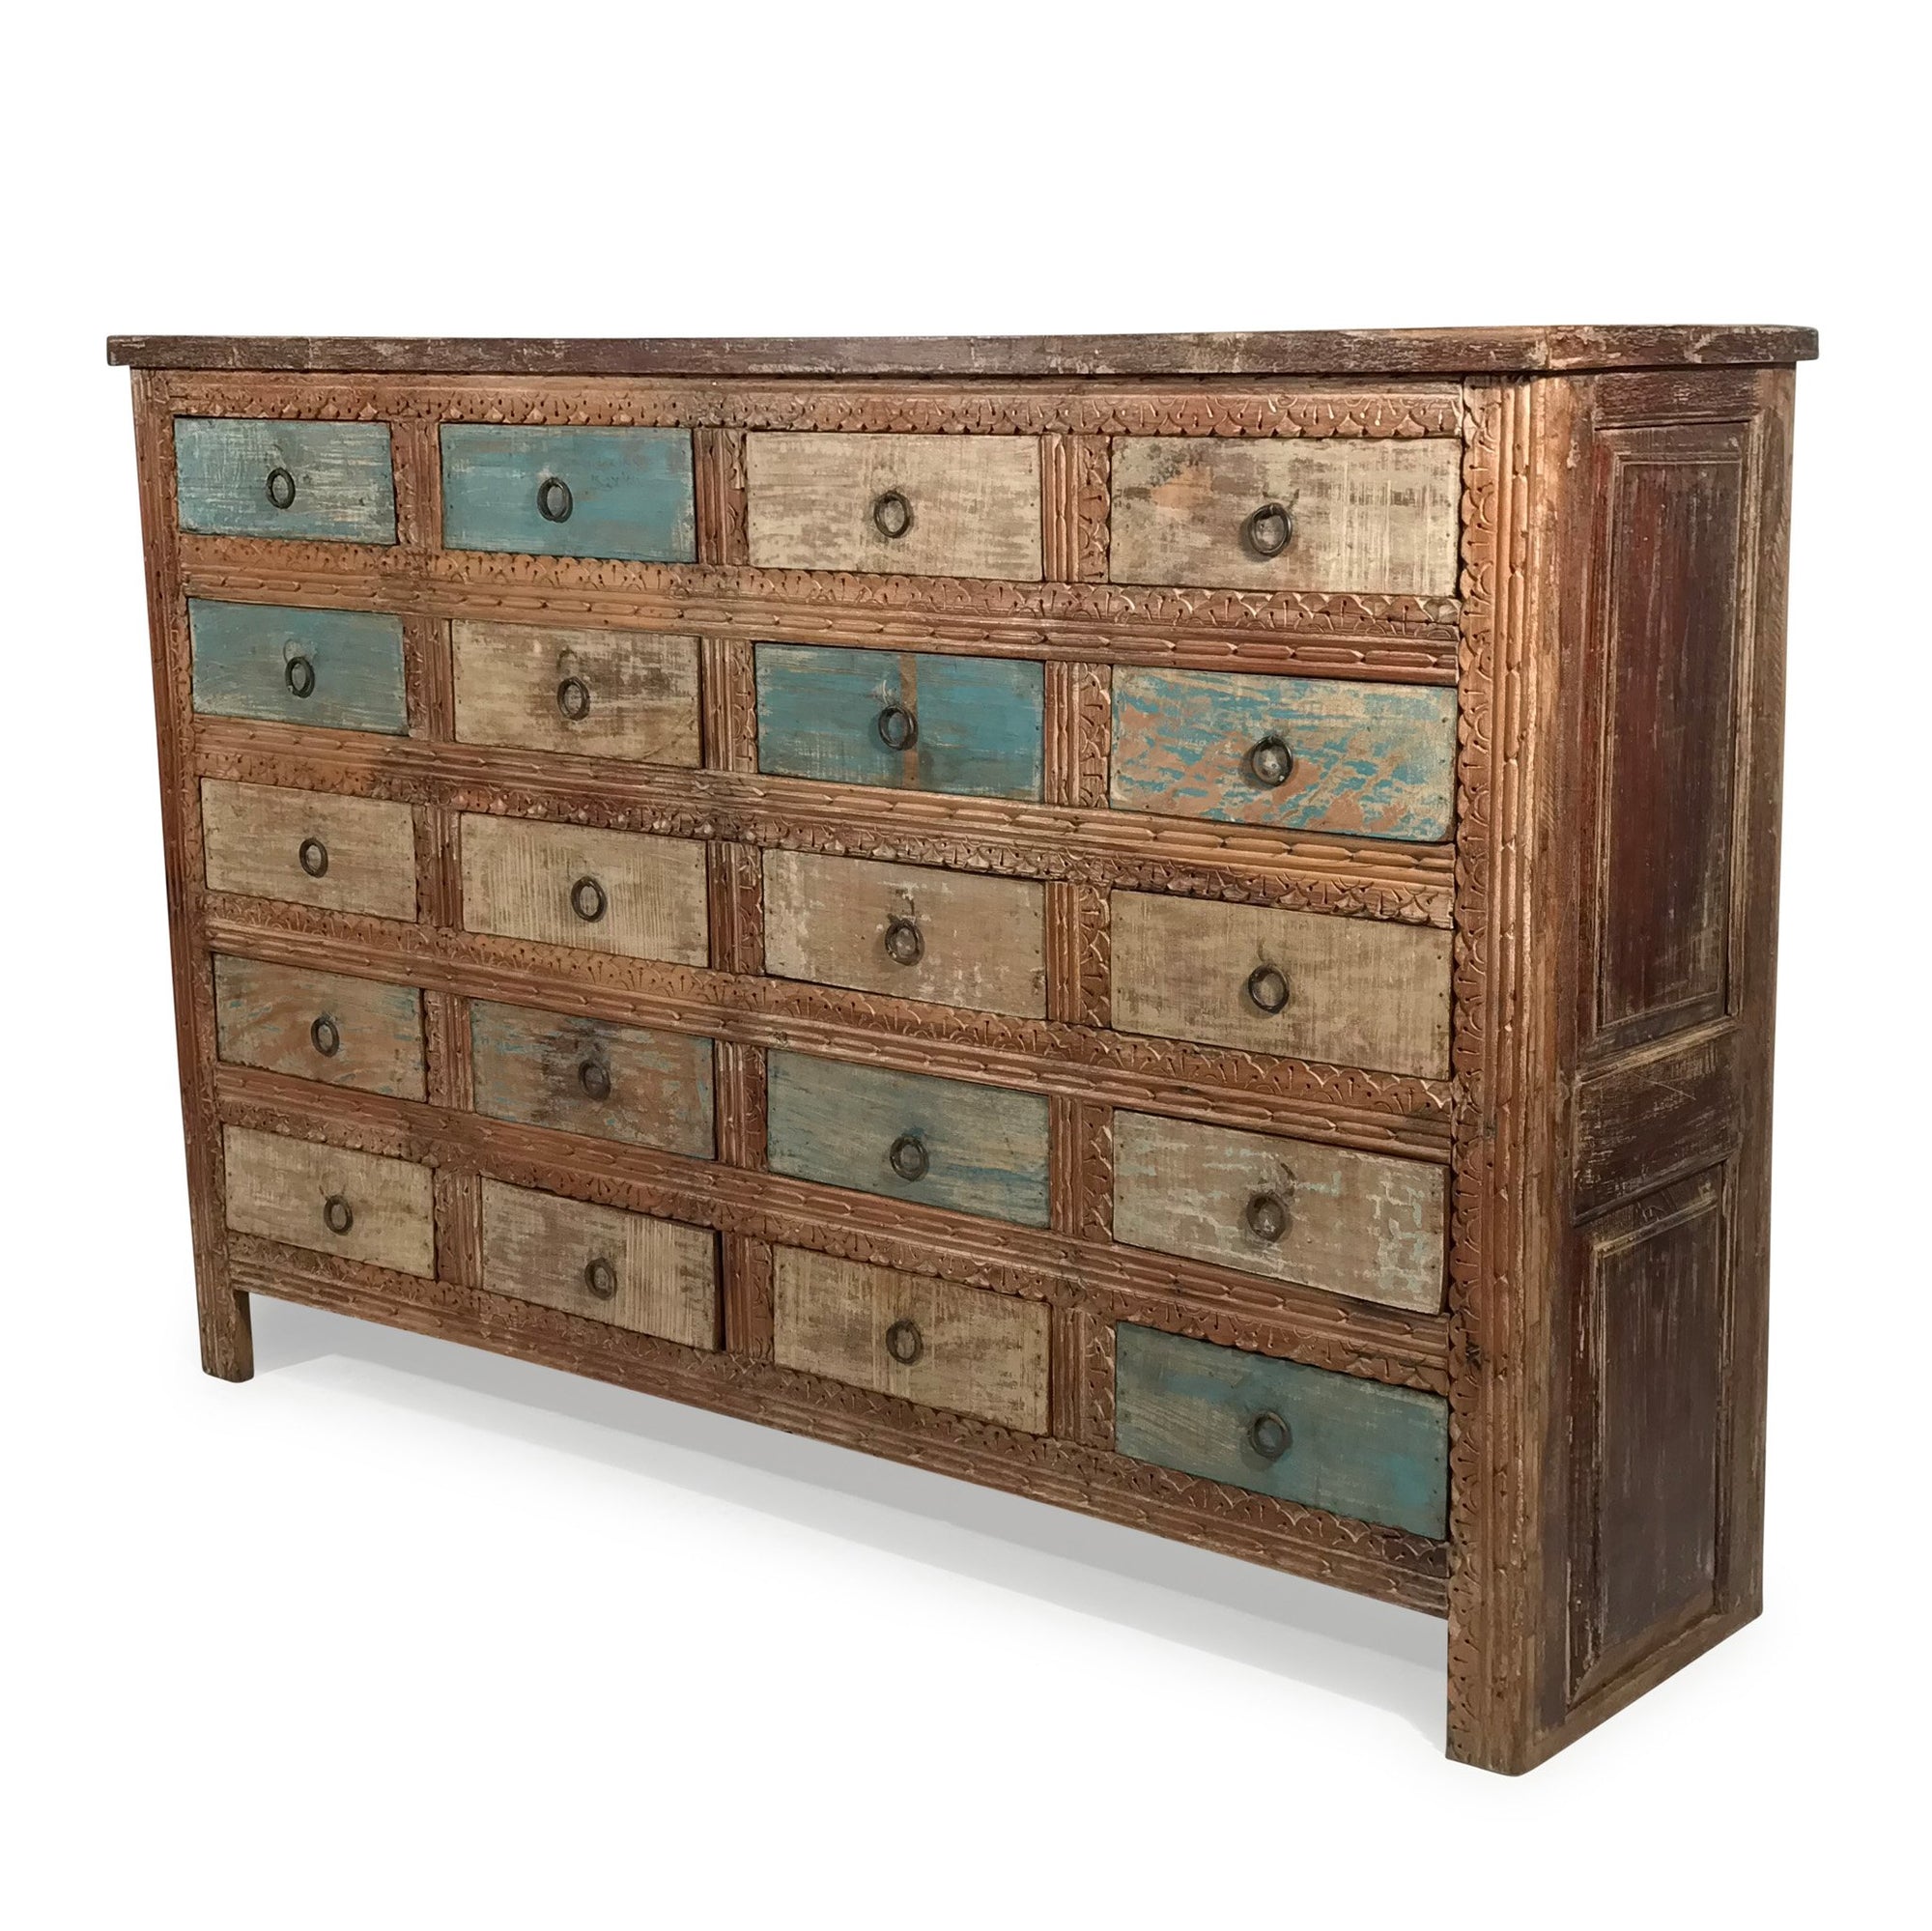 Reclaimed Teakwood Sideboard With 20 Drawers - 153 x 41 x 102 (wxdxh cms) - A6221